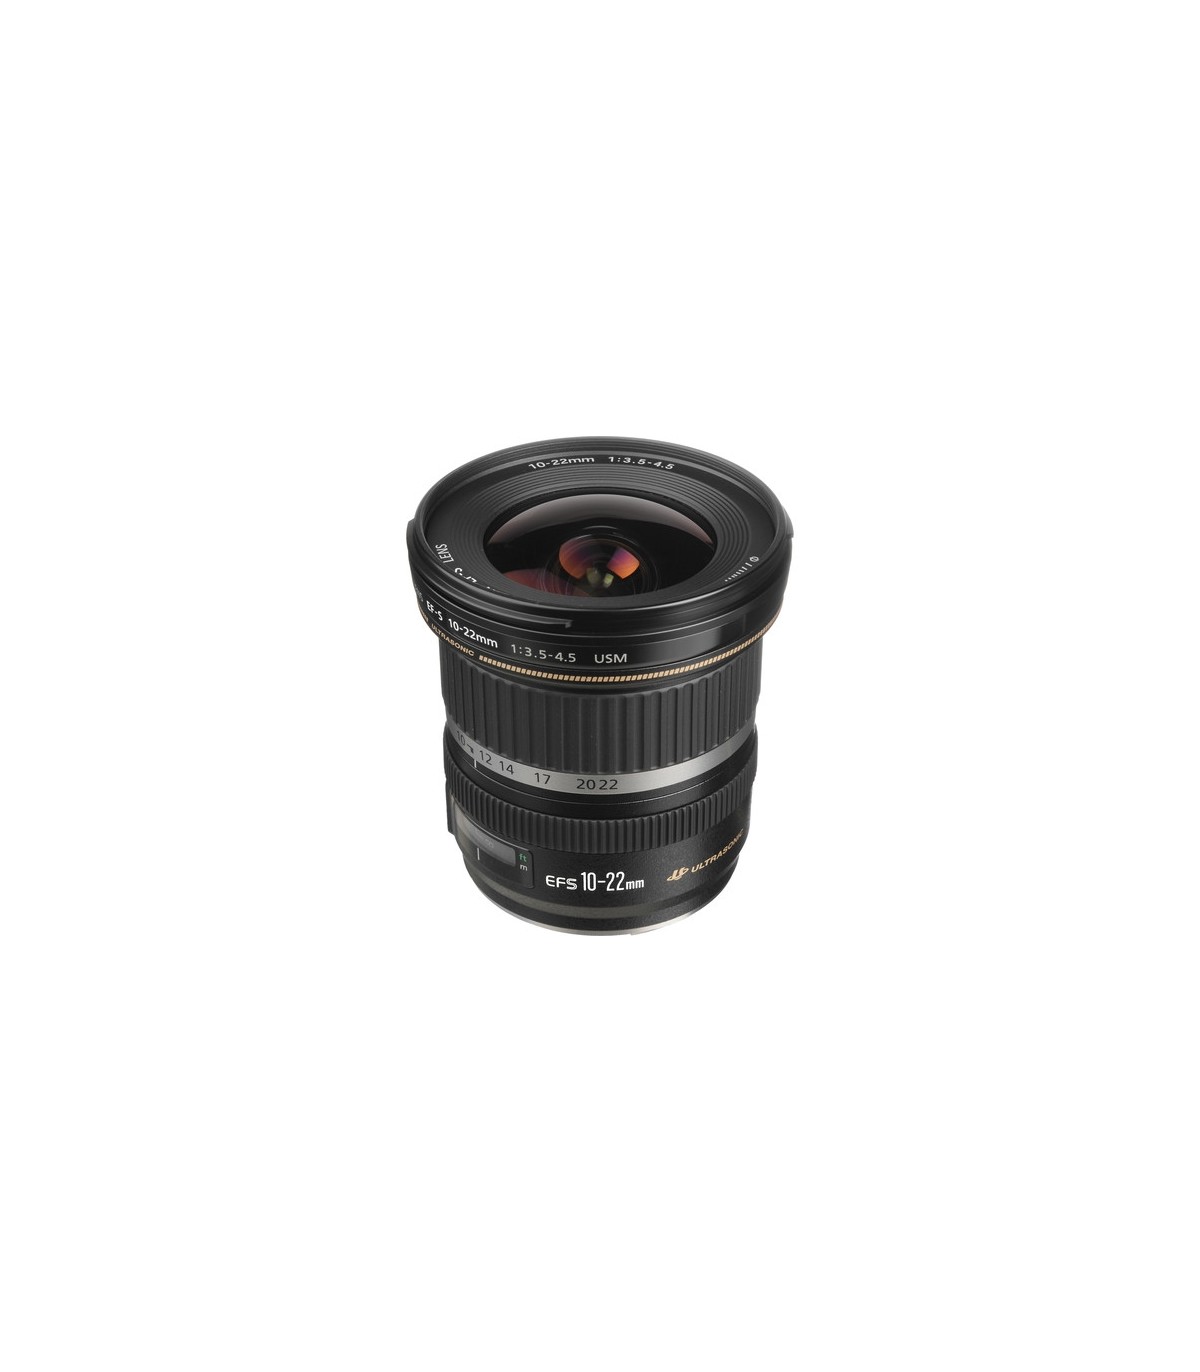 CANON 10-22mm Dubai - Buy Canon Lens At Discounted Price in UAE.